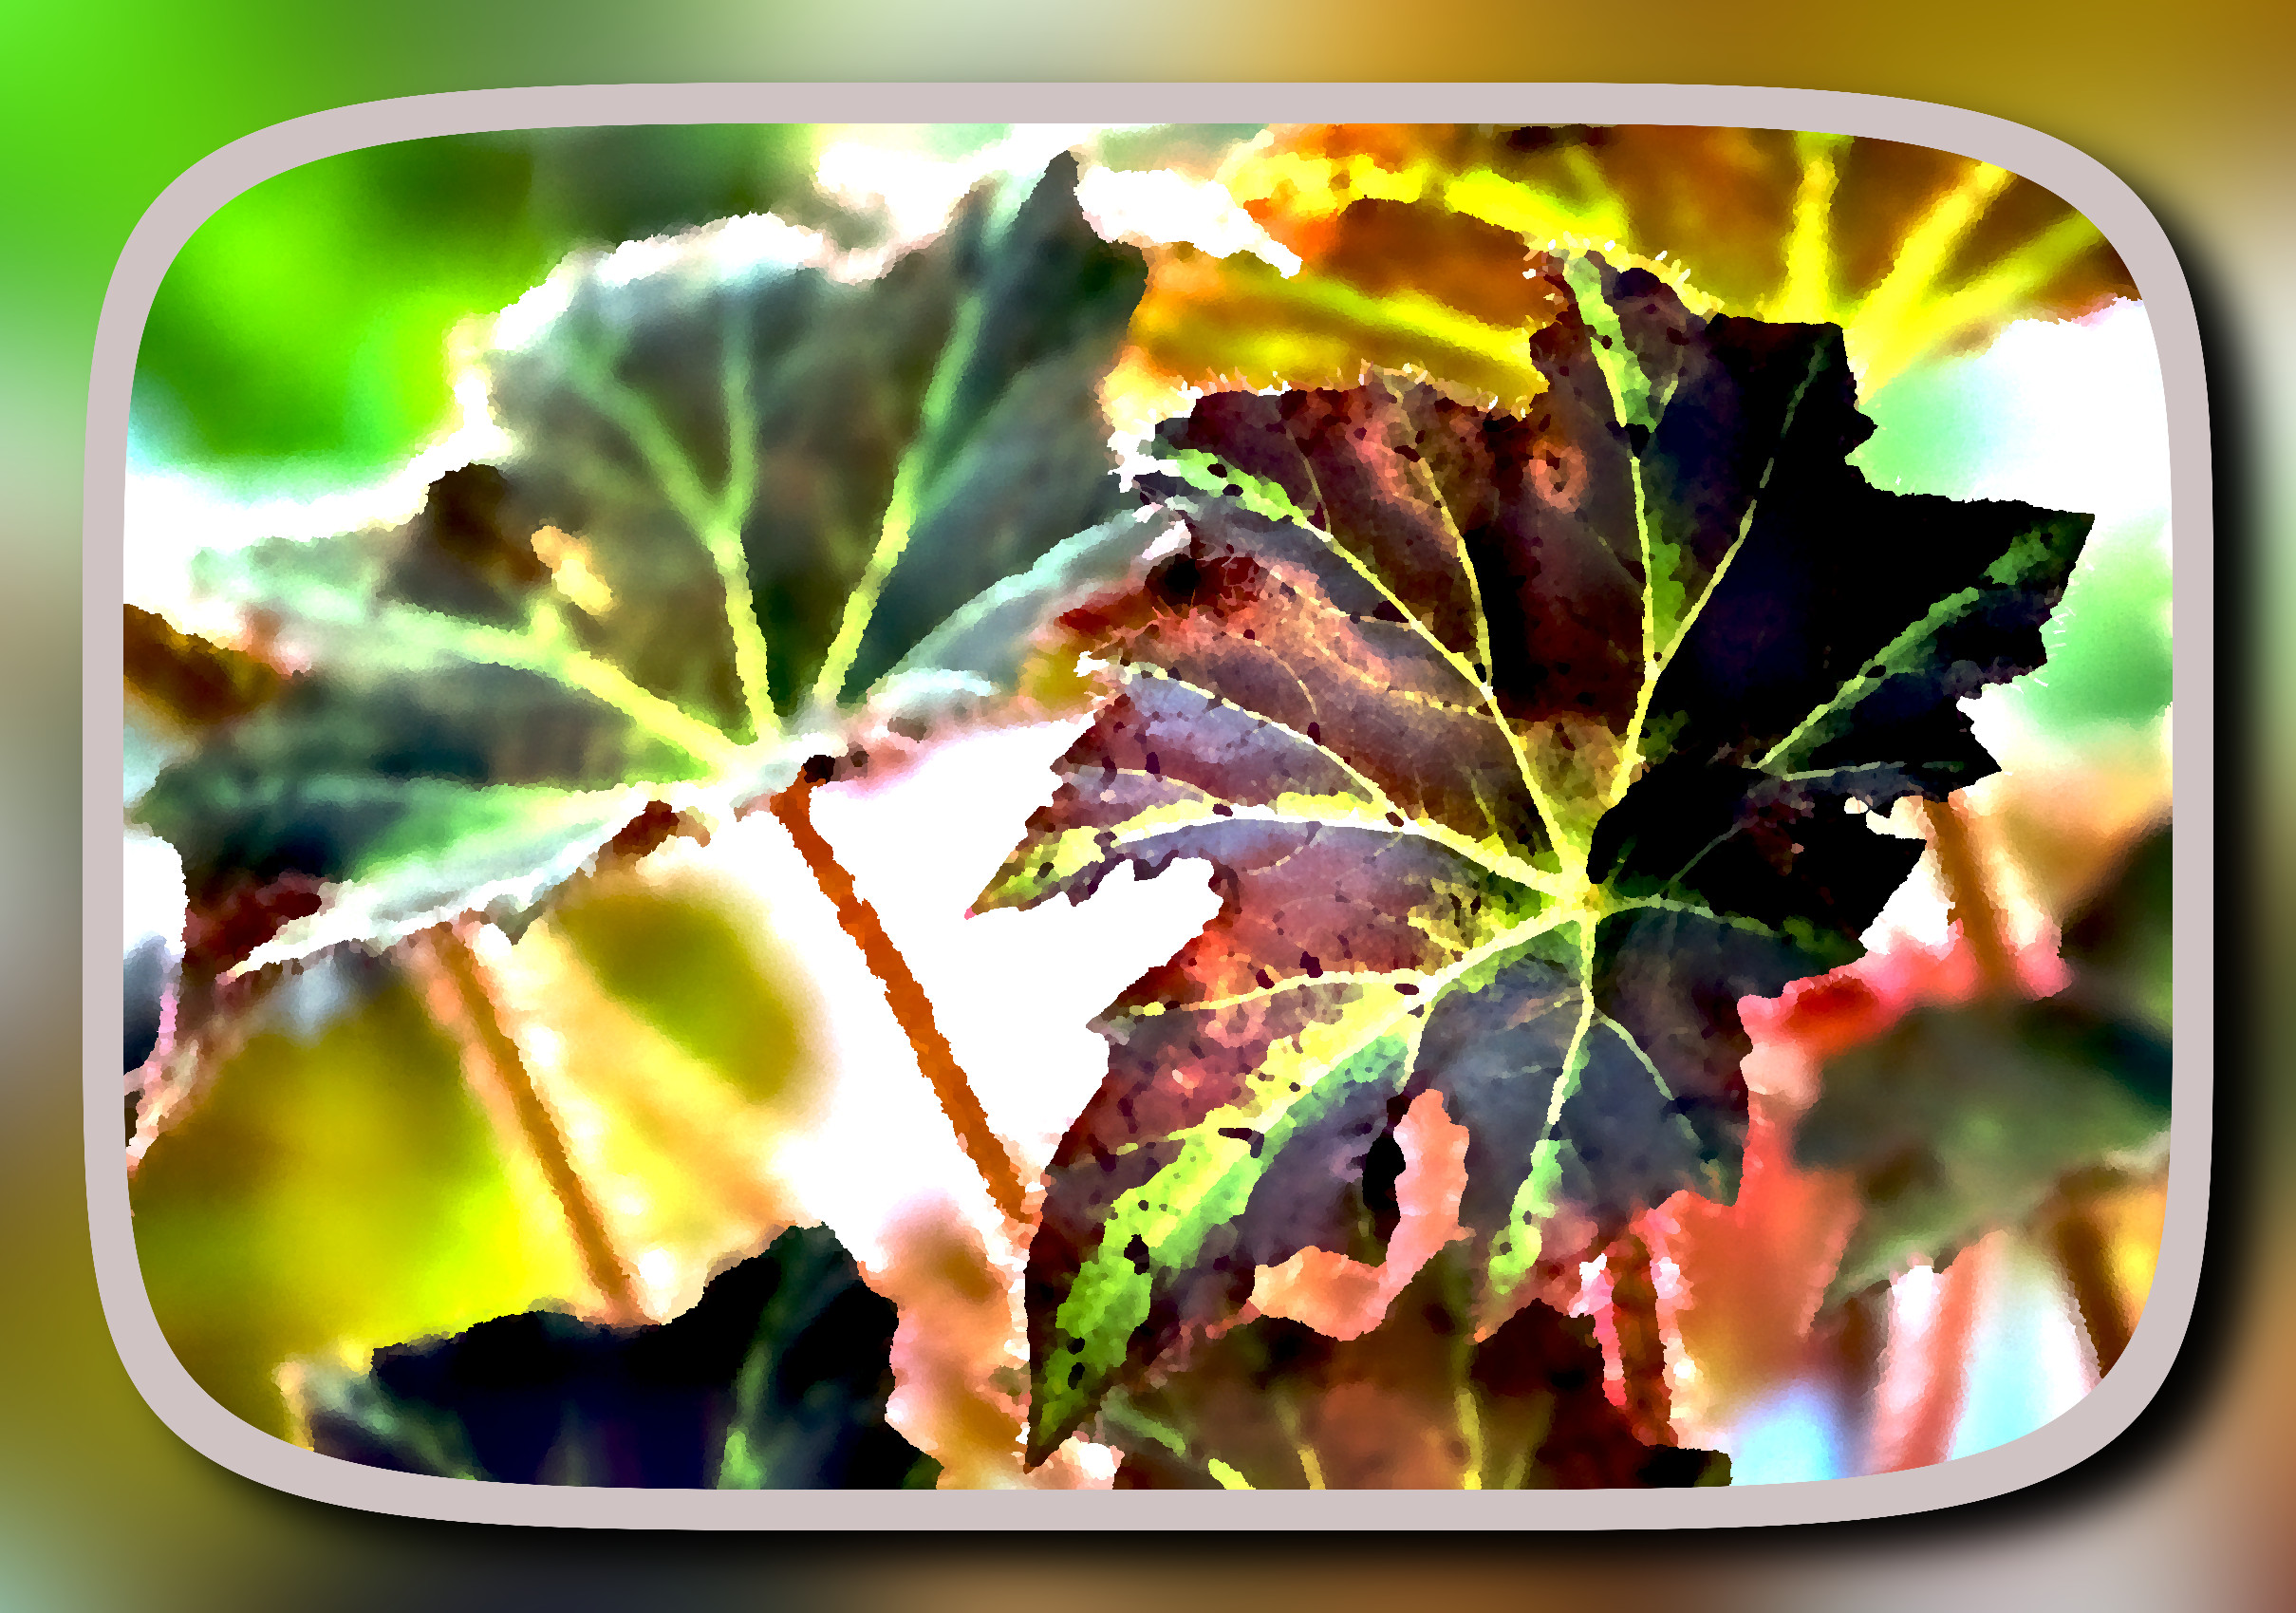 begonia-8115230_LocalProcessingNormalize_DN_ ArtisticFramed_SmoothAbstract.JPG